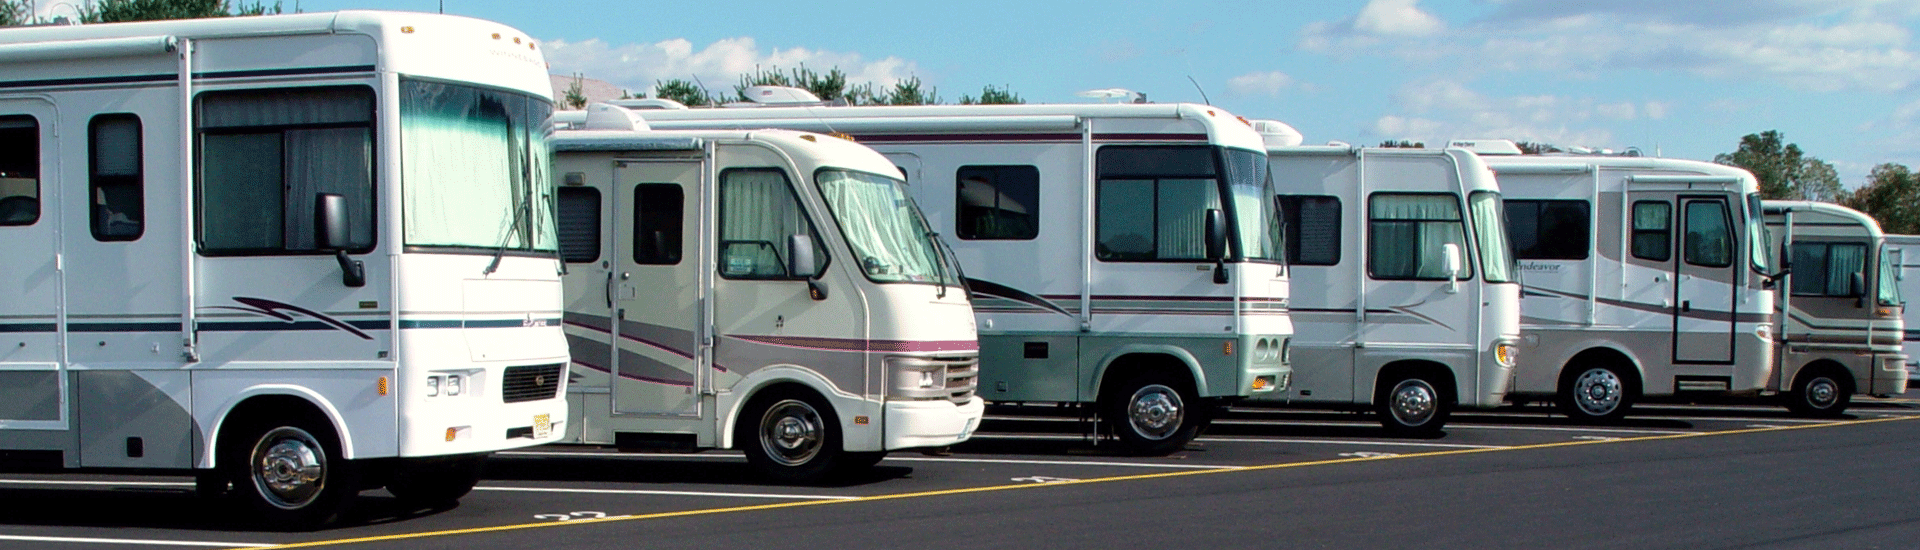 Recreational Vehicles on a Parking Lot